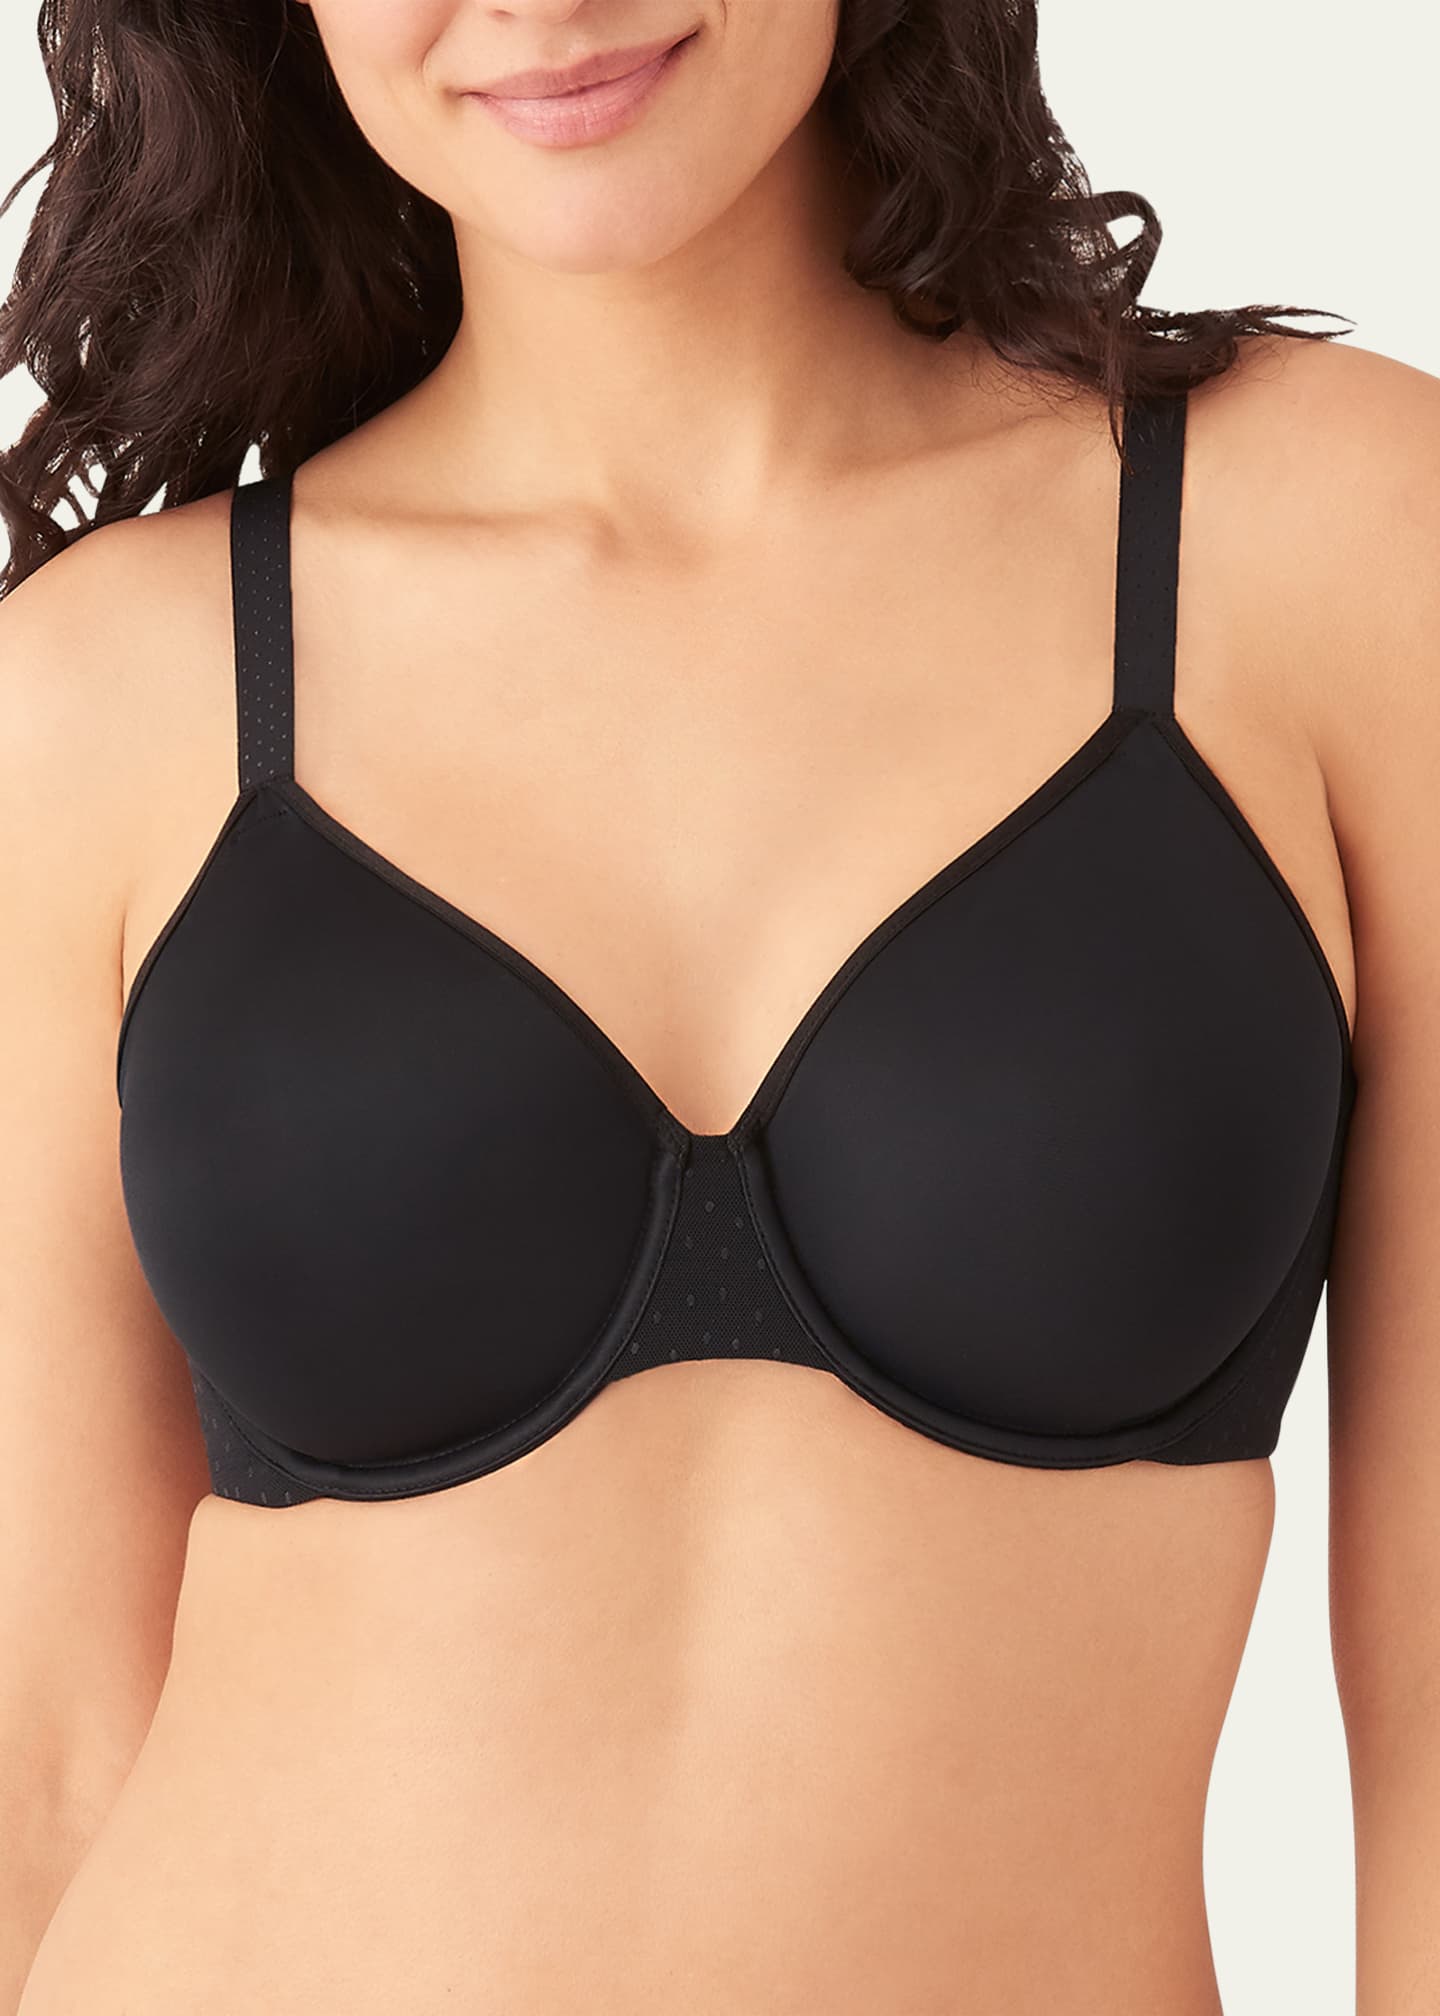 Wacoal Back Appeal Underwire Minimizer Bra Image 2 of 4